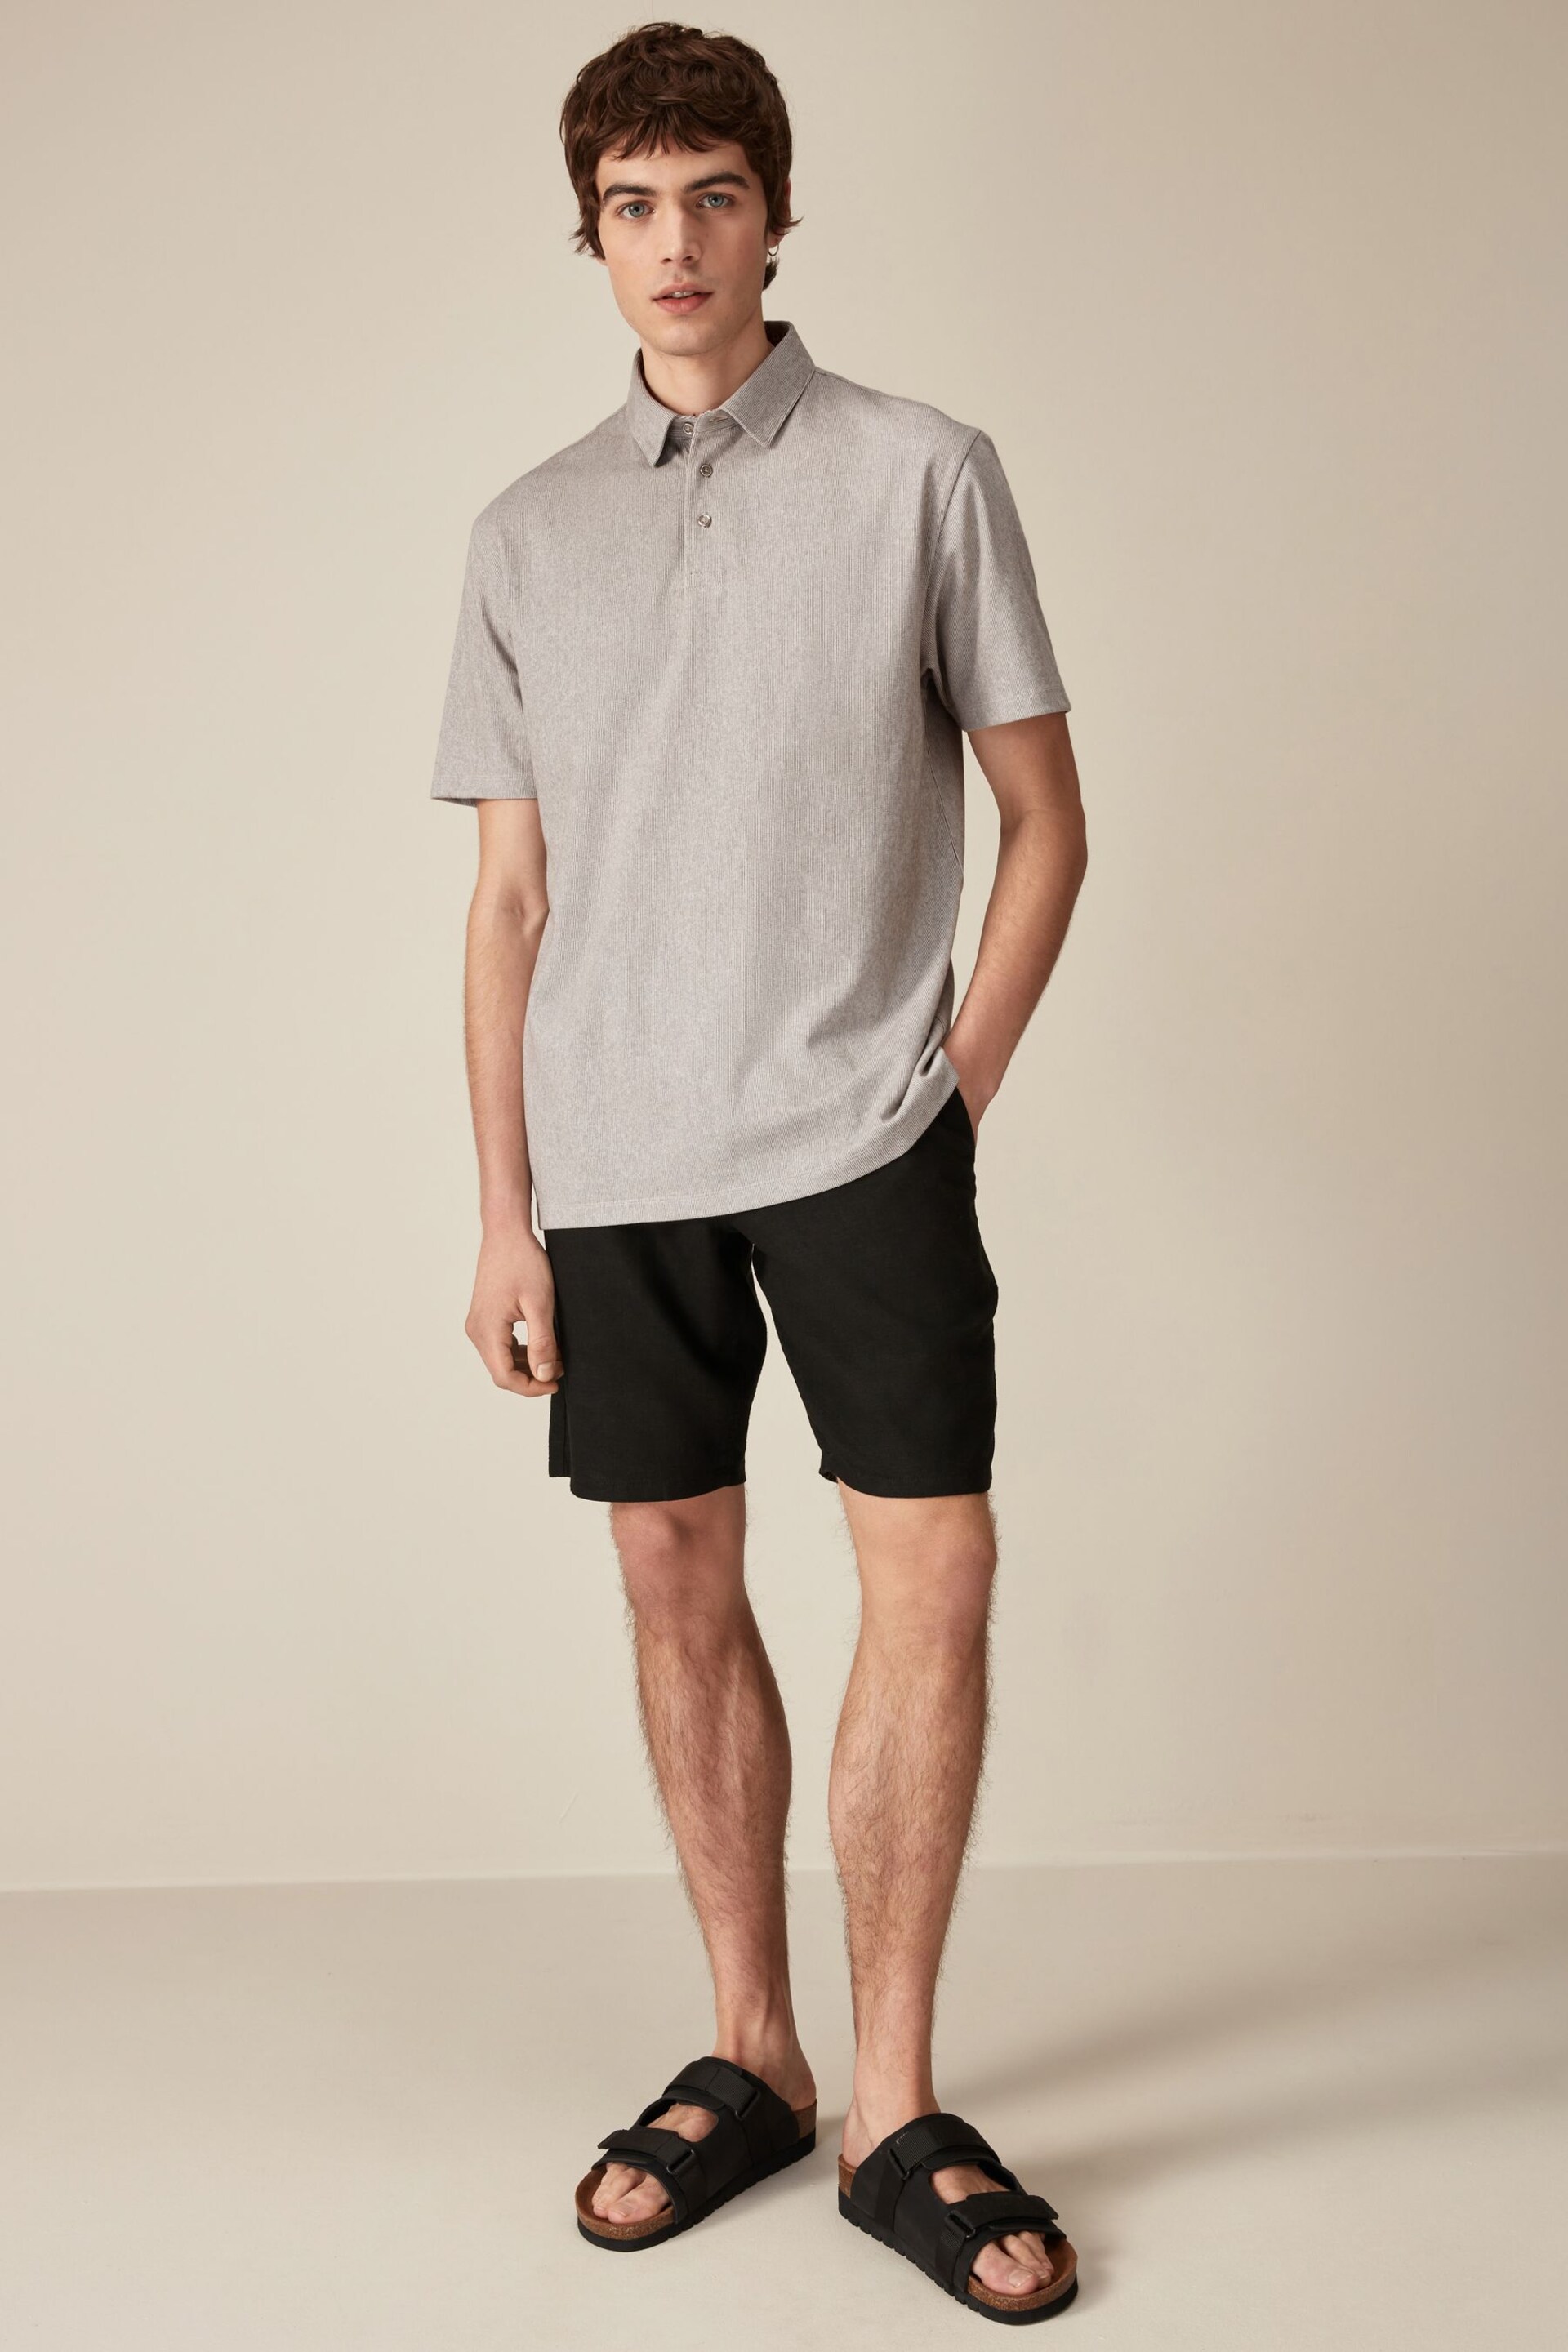 Neutral Oxford Cotton Blend Polo Shirt - Image 2 of 8